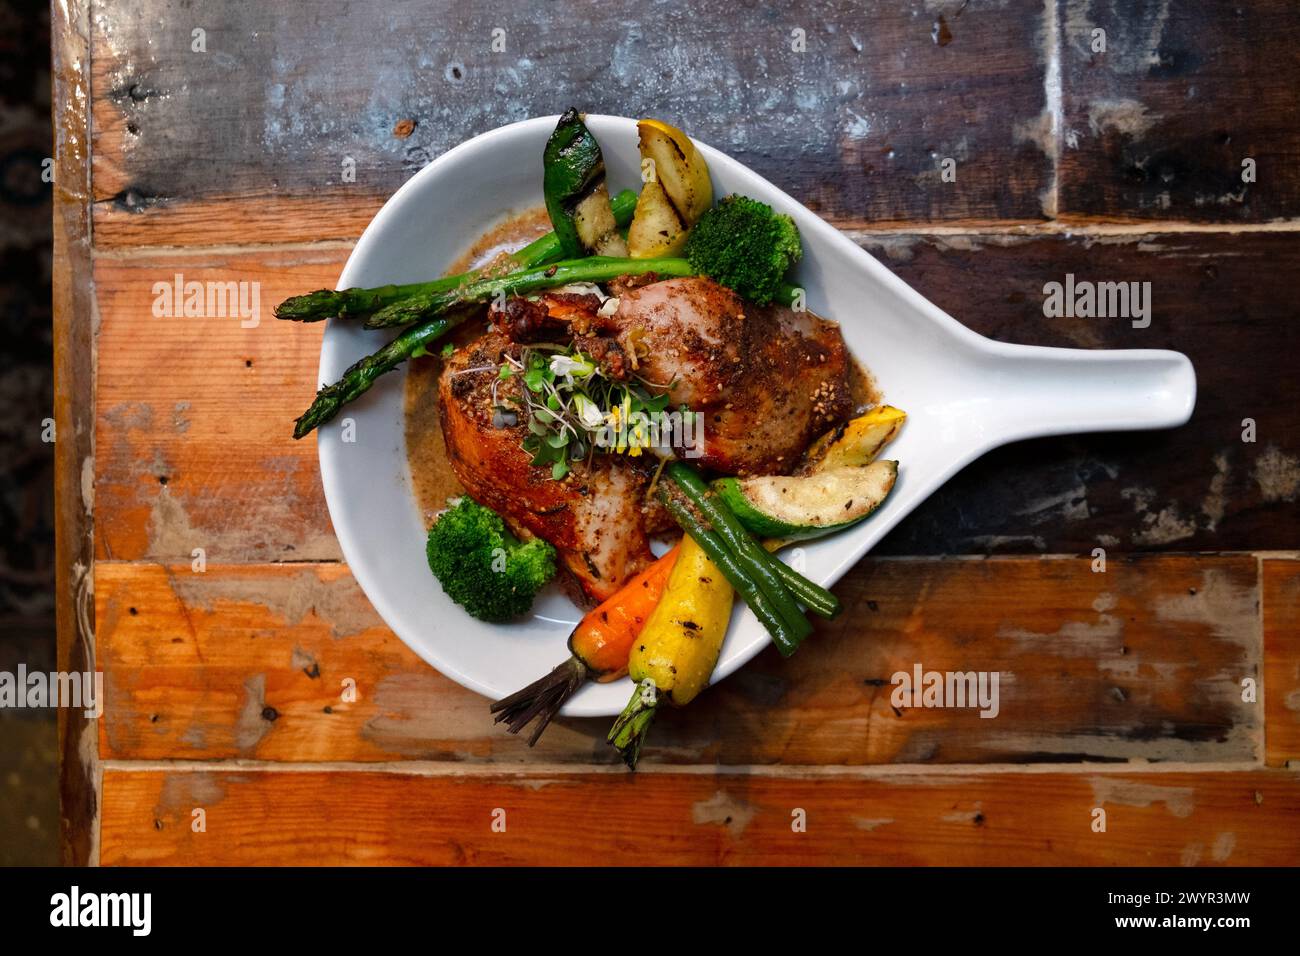 Overhead view of chicken dish on table in restaurant Stock Photo